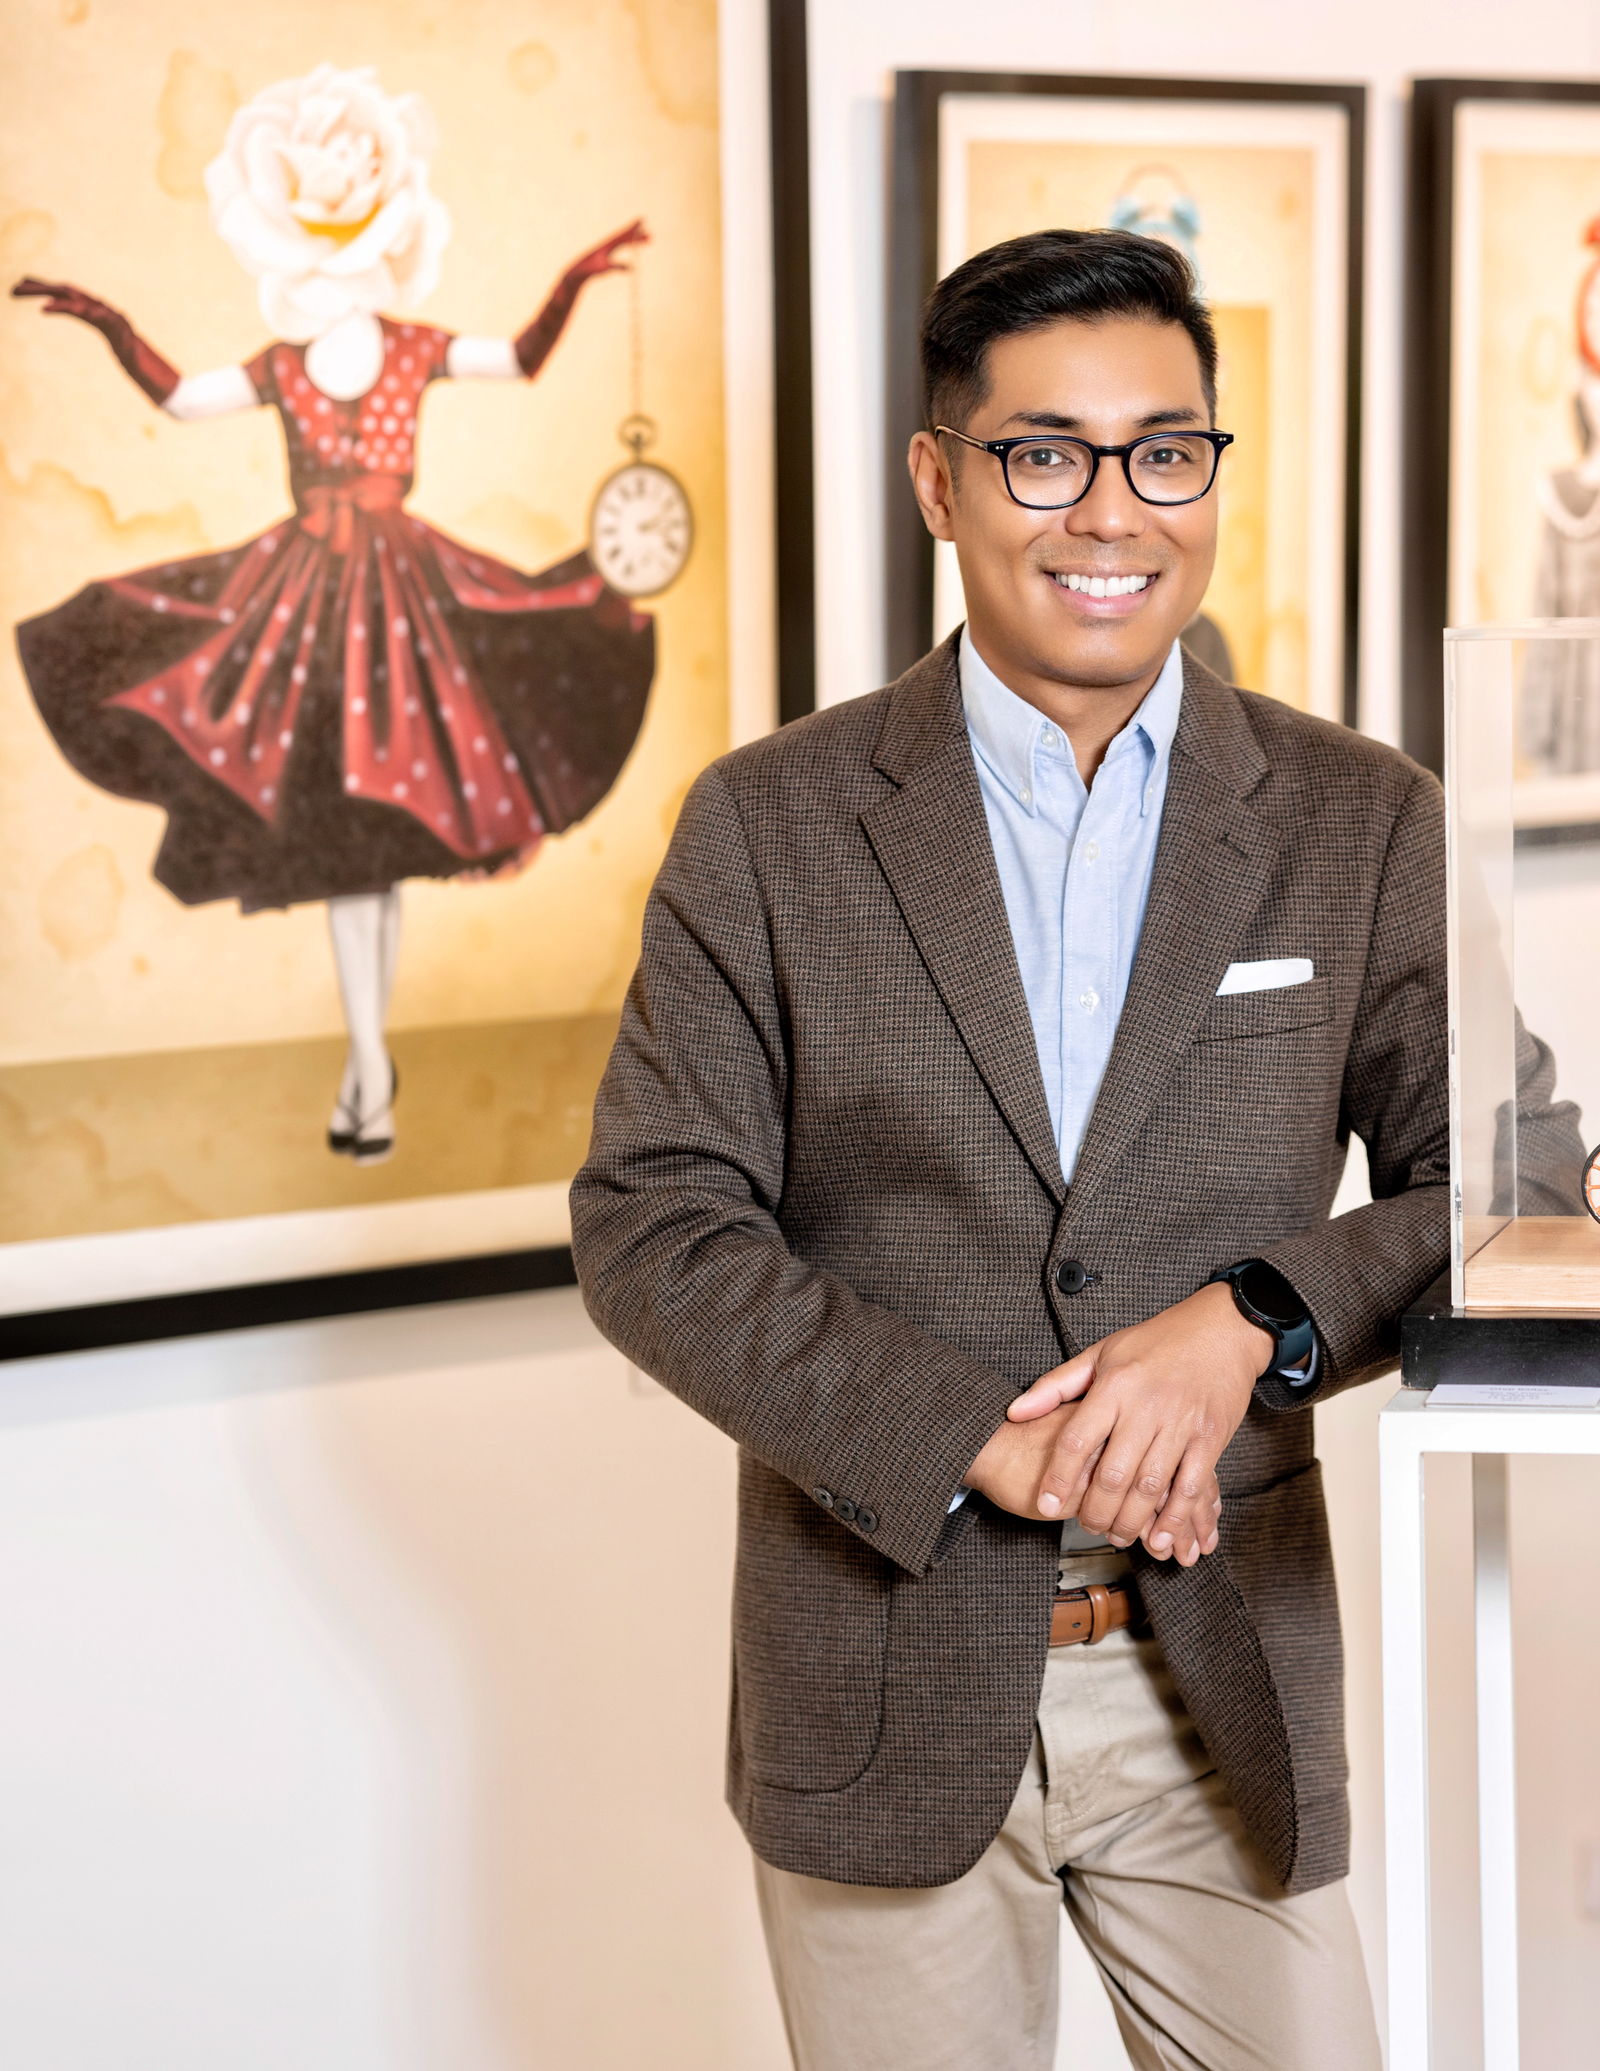 Francis Marte Honors His Creative Calling For Business Concept